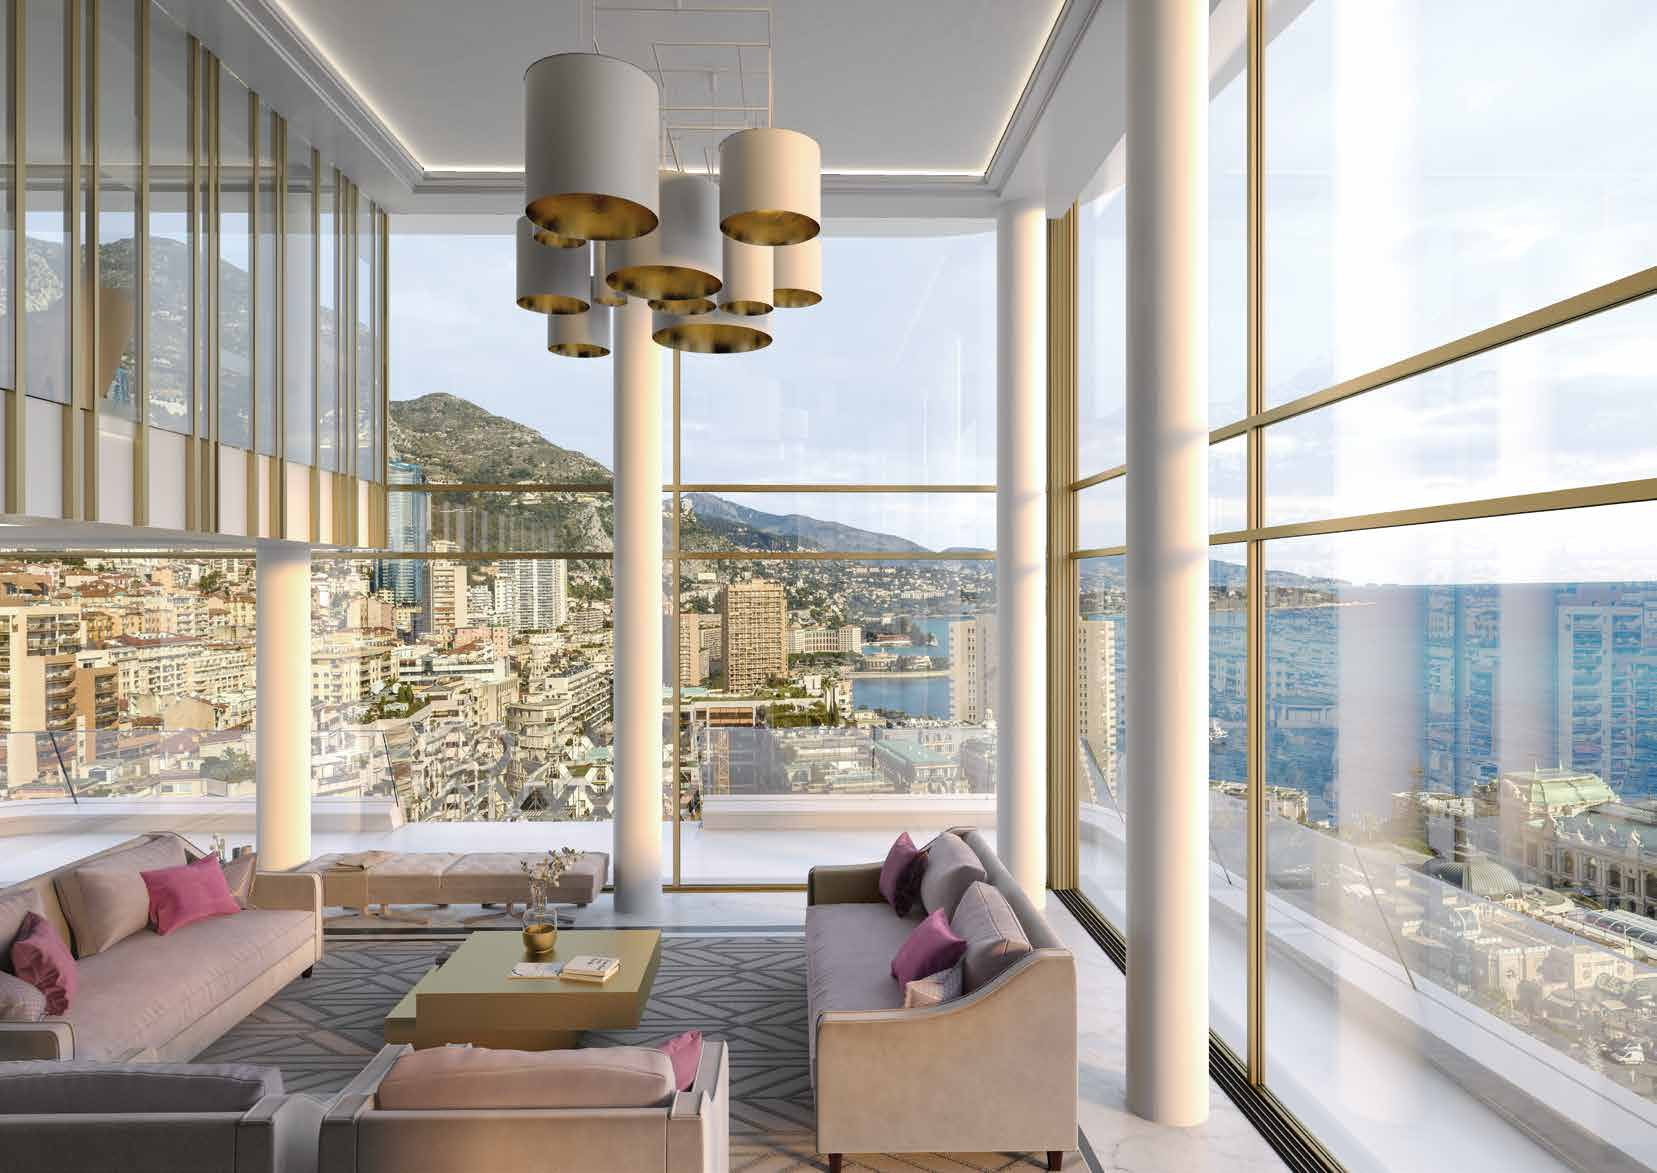 Monte-Carlo's Finest in 418 sqm Apartment at 26 Carré d'Or